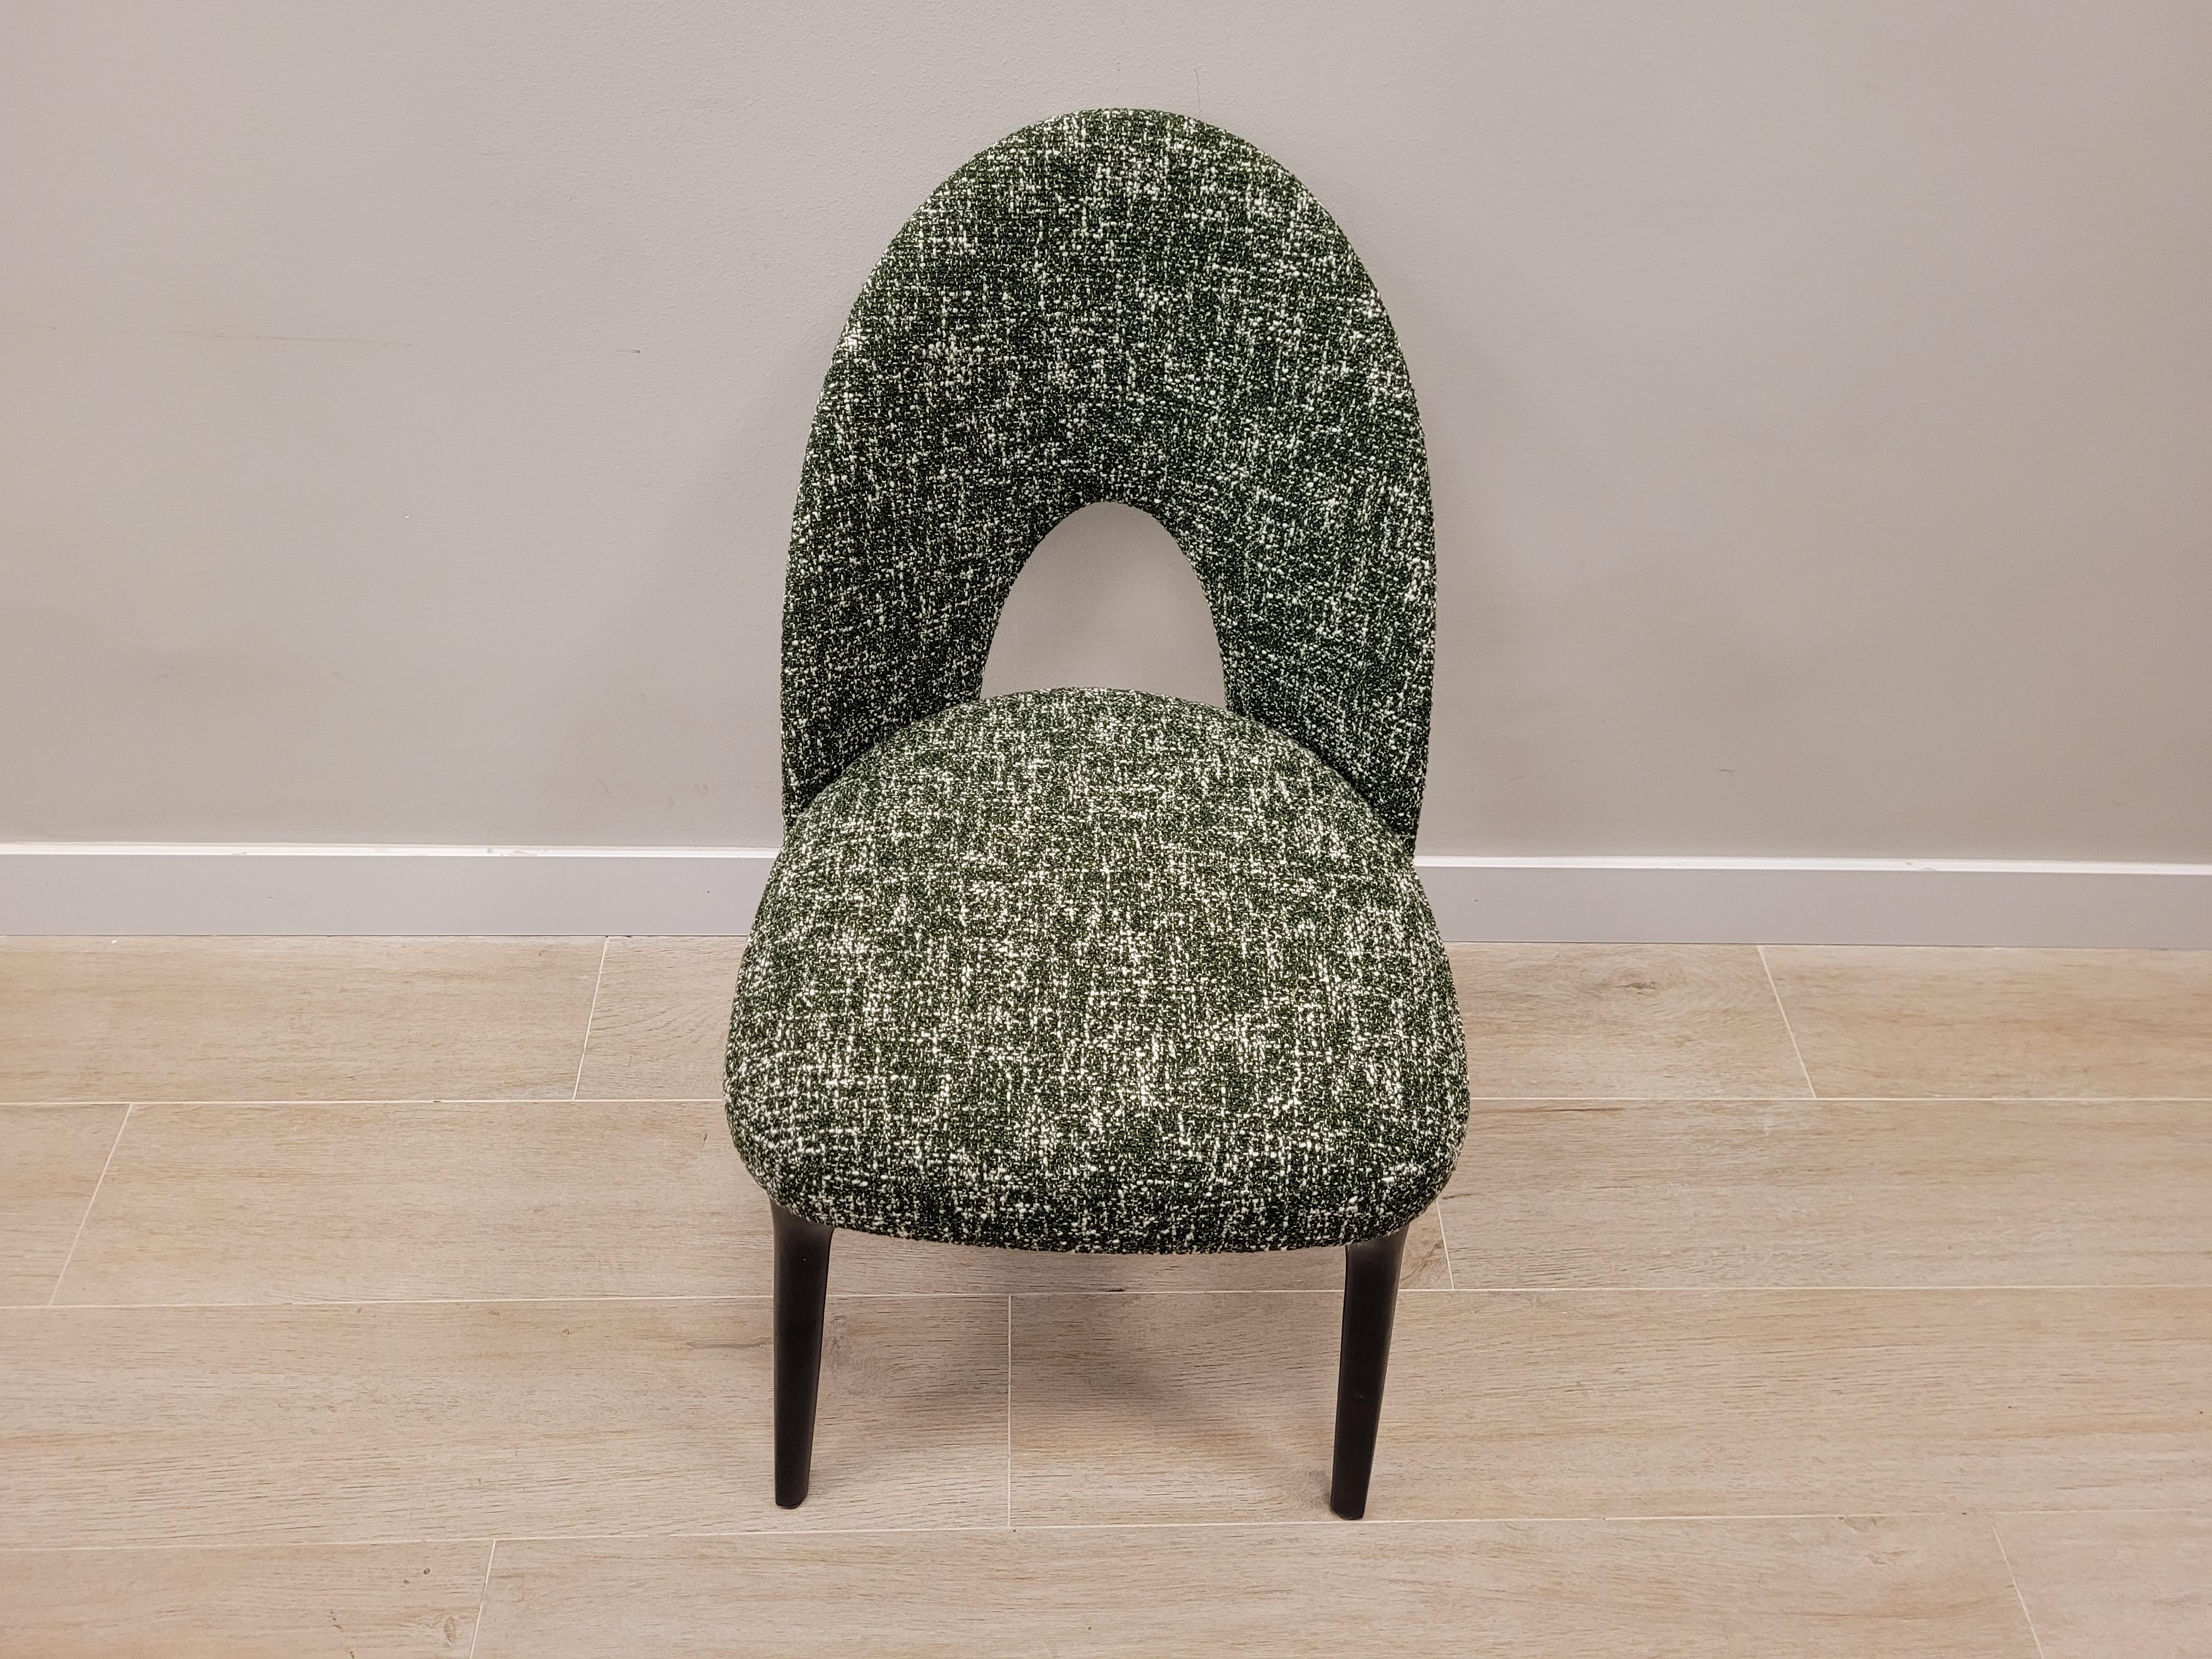 Fabric Roche Bobois Set of 4 Green Chairs, France